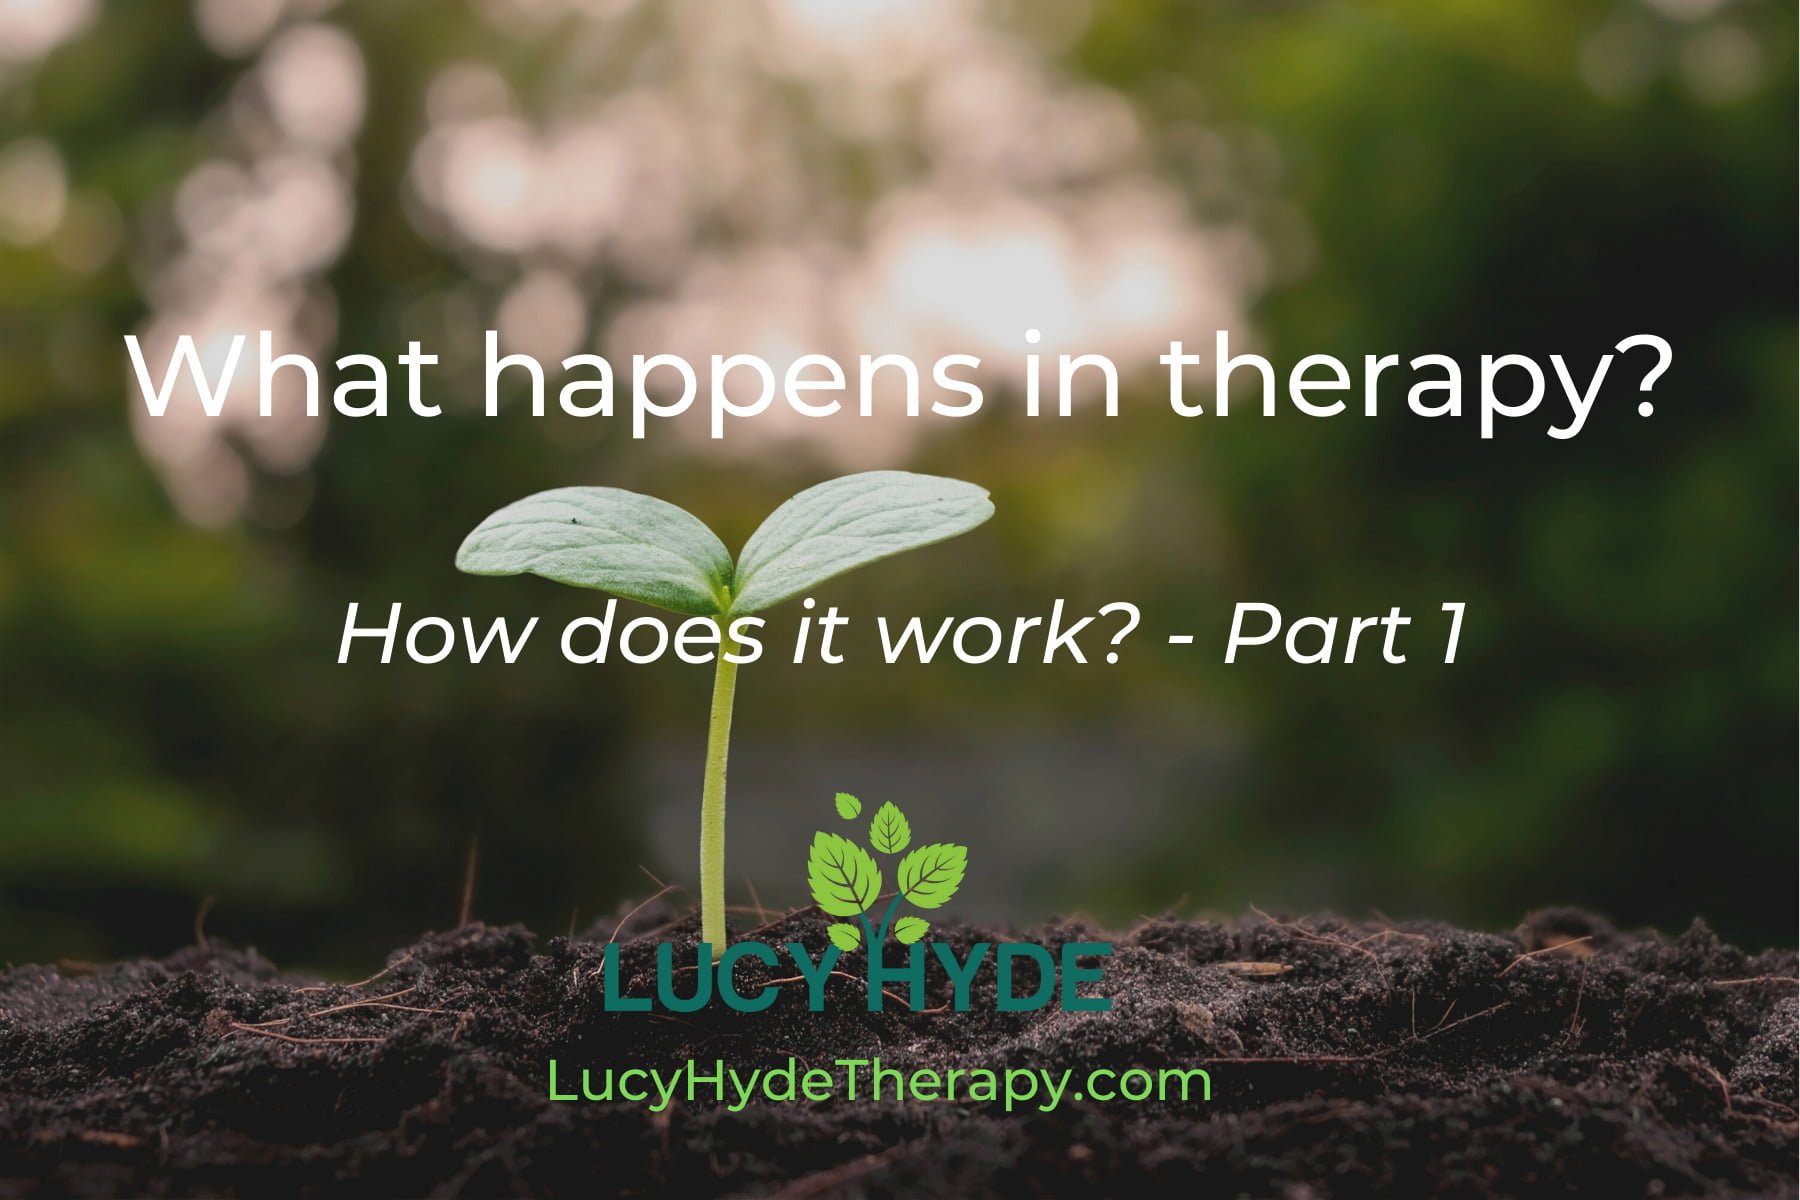 What happens in therapy?